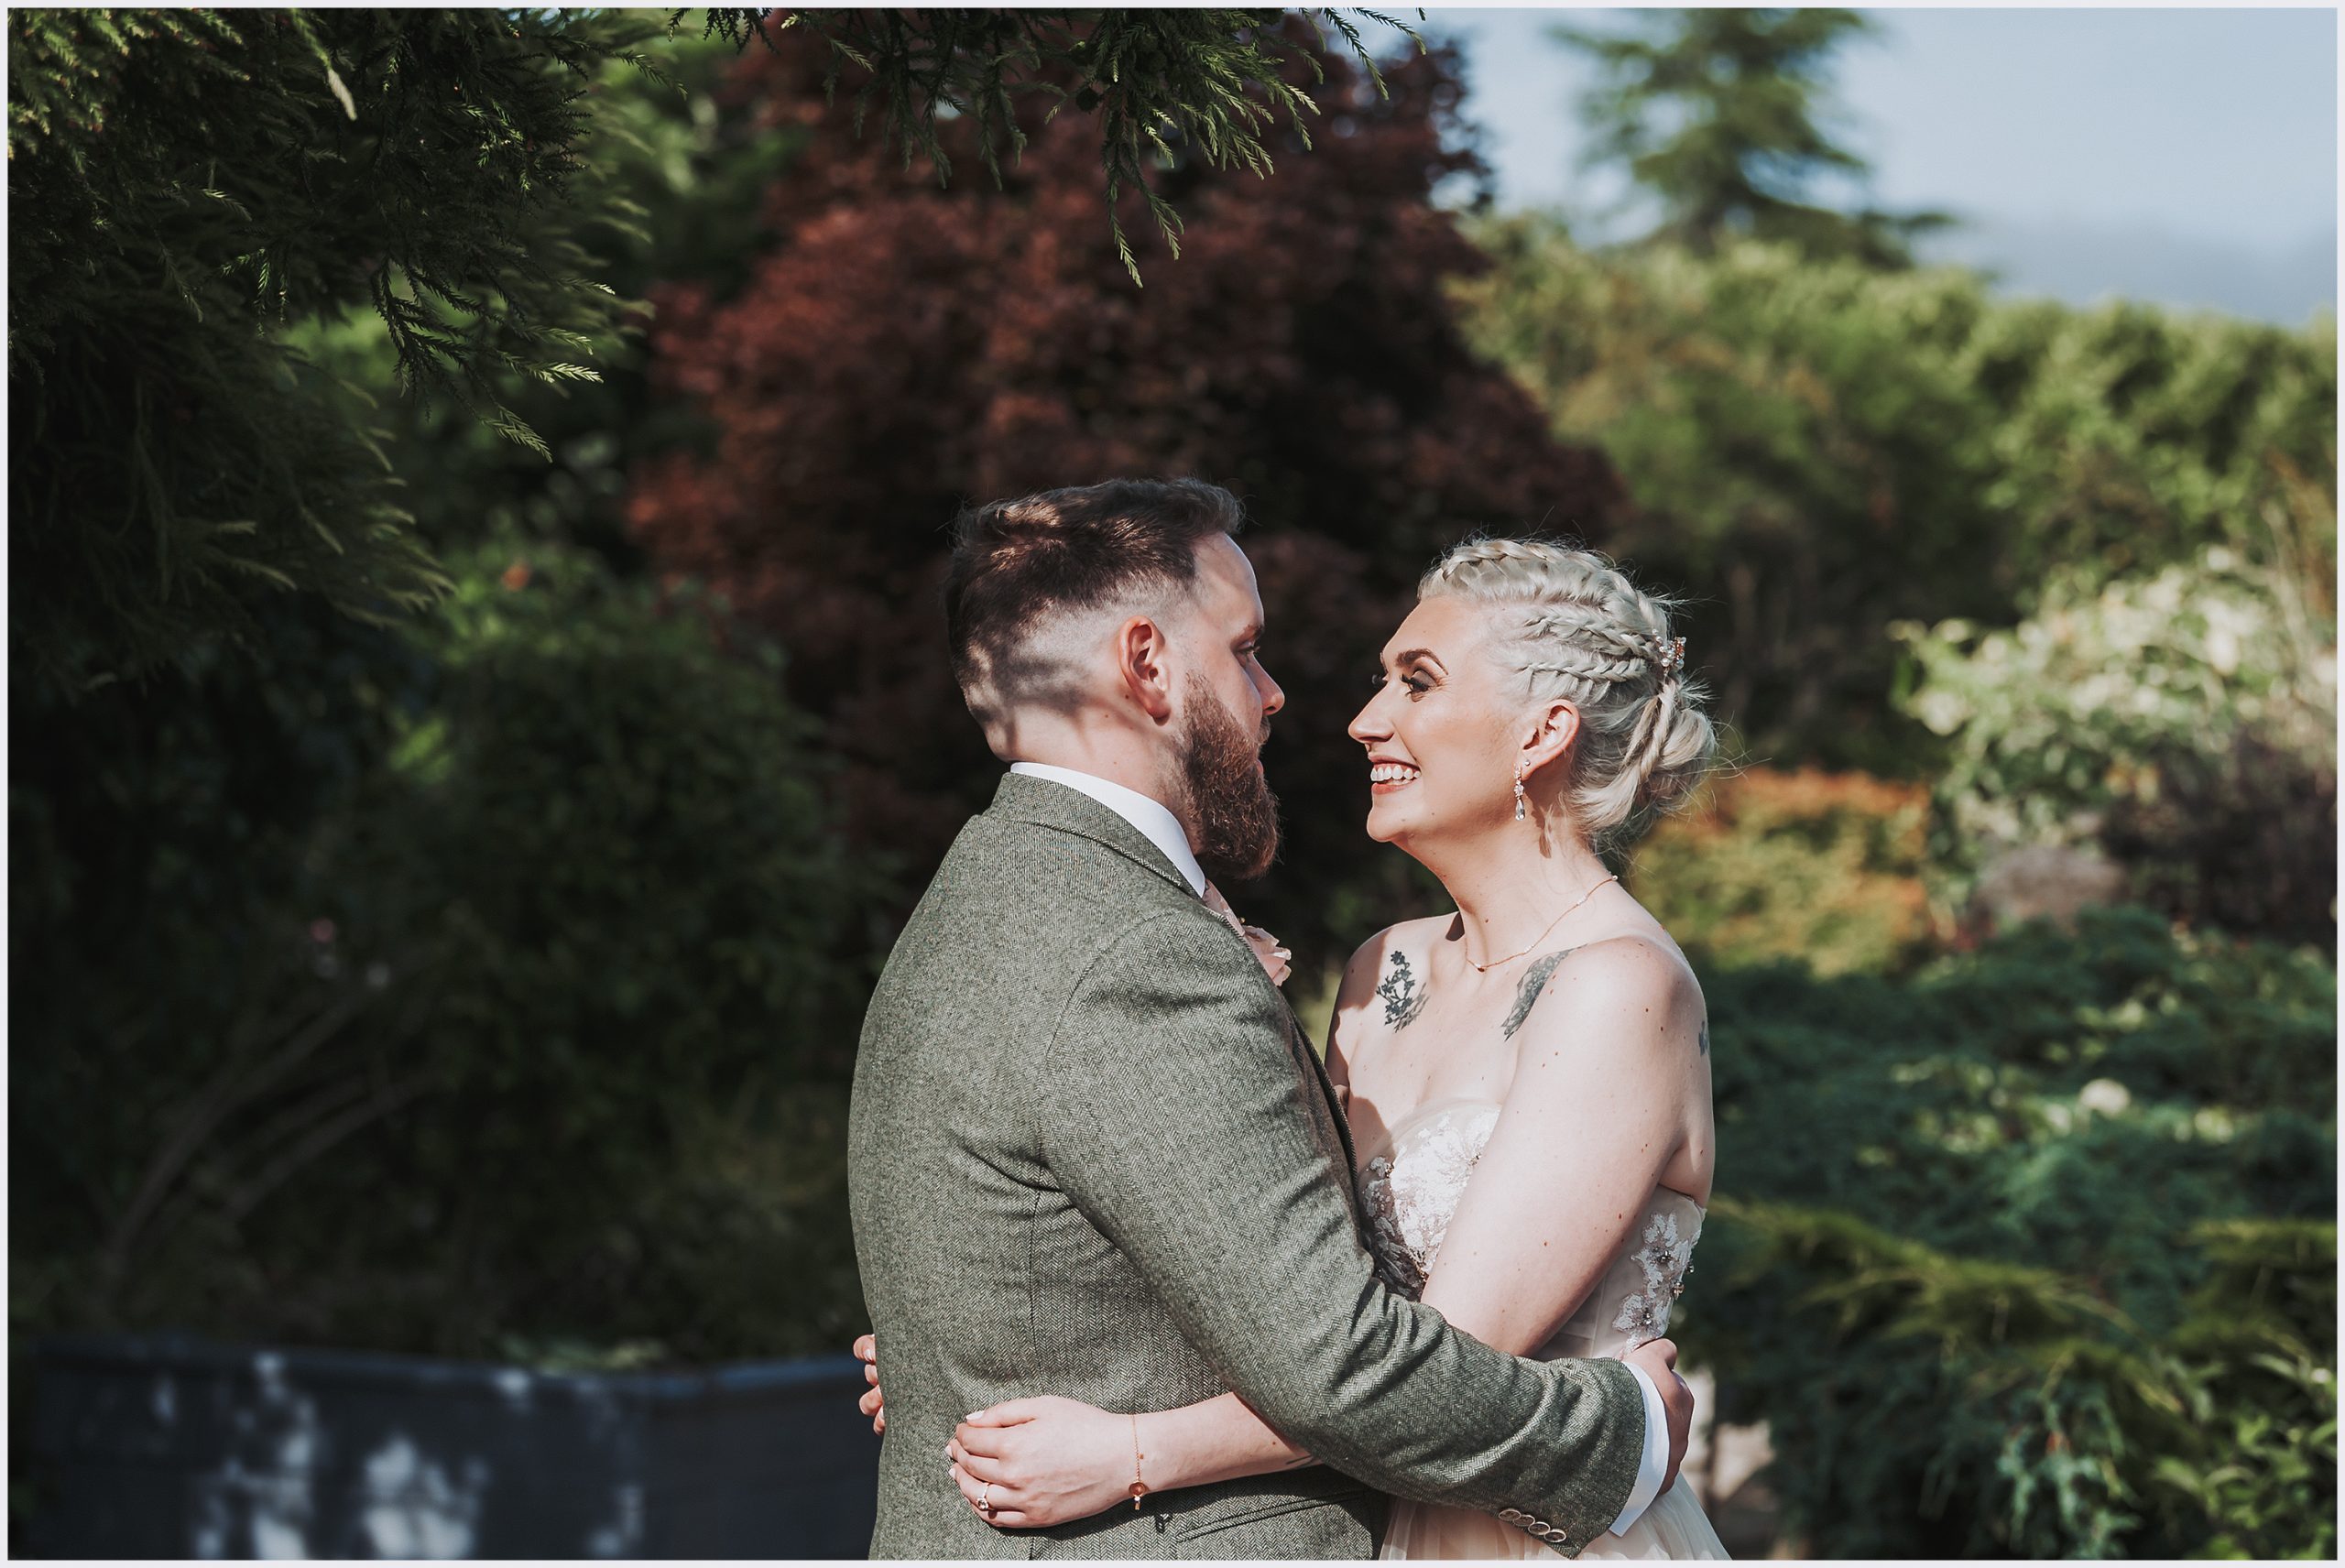 North Wales' Natural Beauty Frames Bride and Groom's Joyous Union